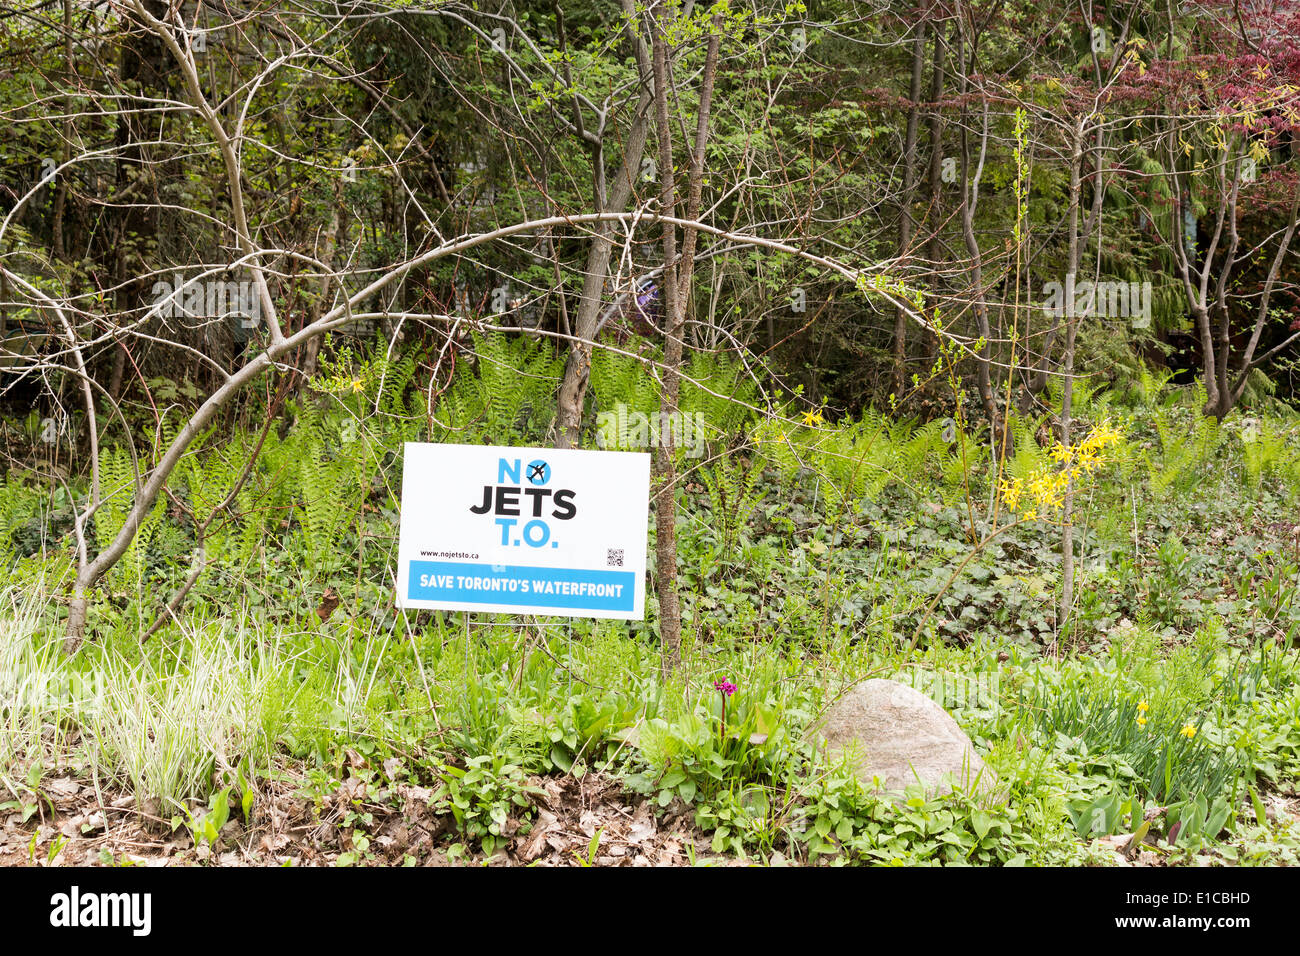 No jets t.o. sign in grass along path on Ward's Island on Toronto Islands protesting the expansion of Billy Bishop Airport. Stock Photo